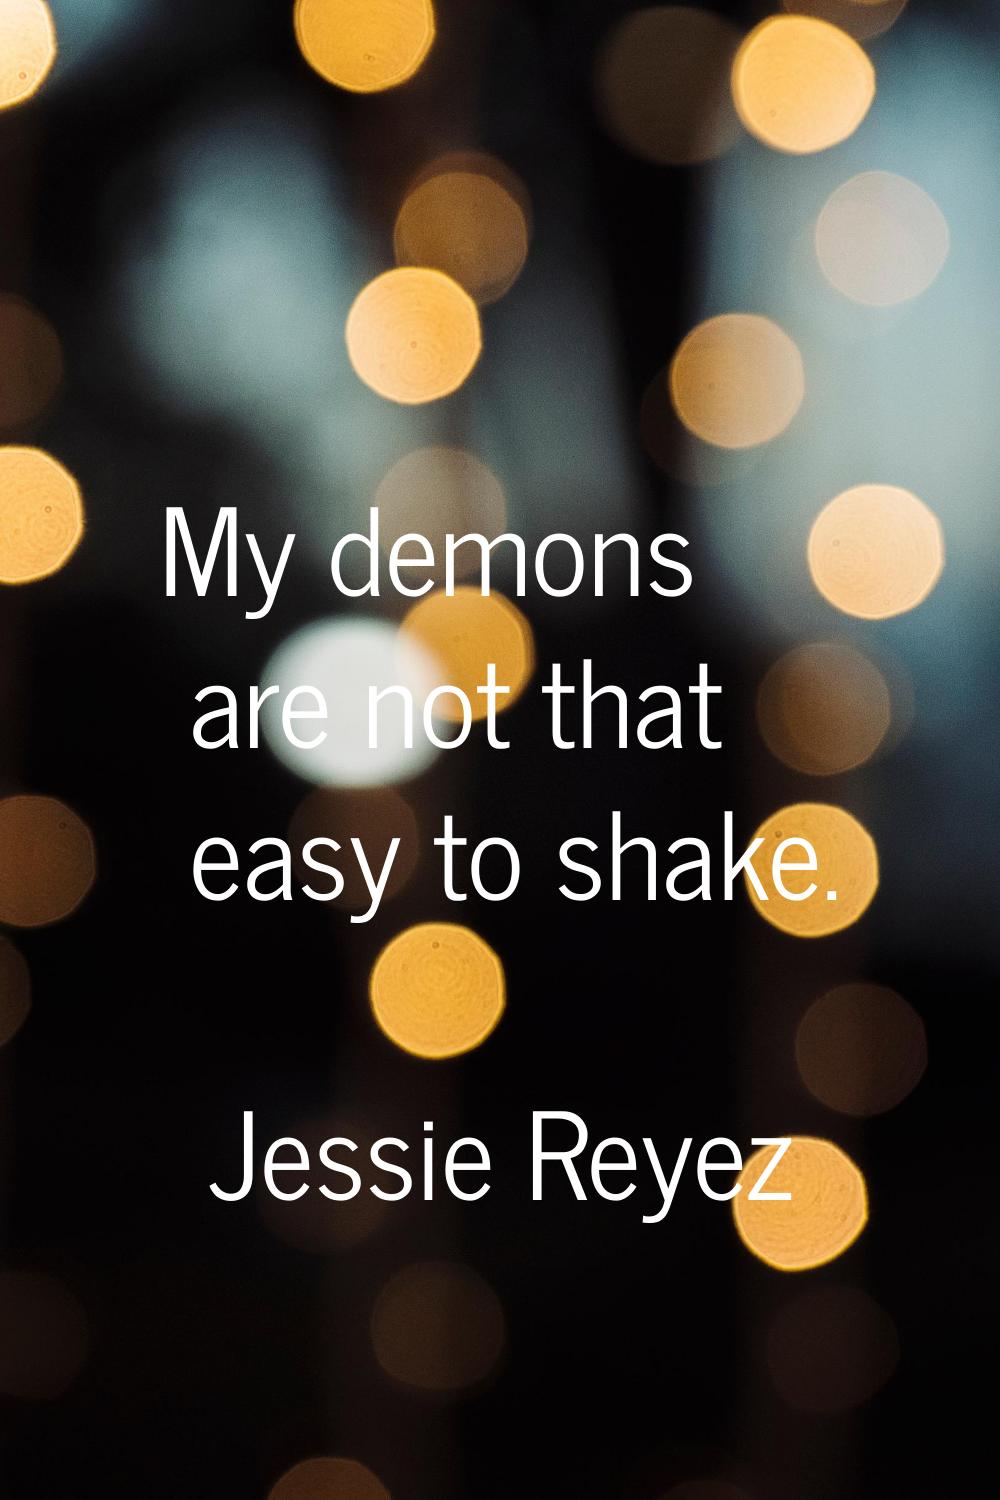 My demons are not that easy to shake.